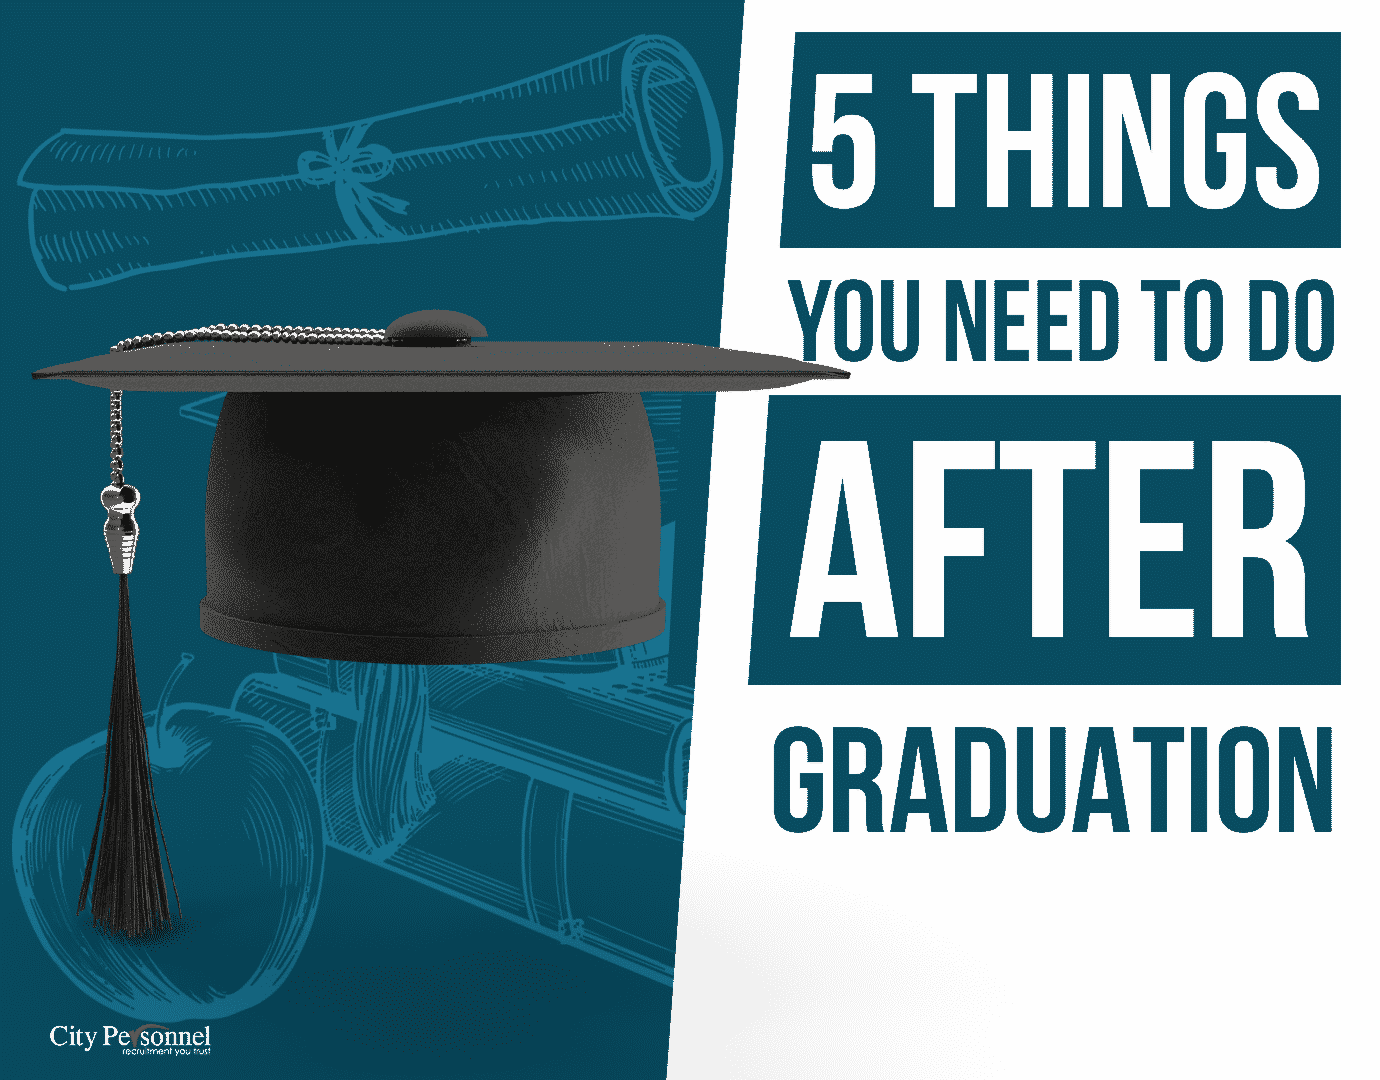 5 Things You Need to do After Graduation